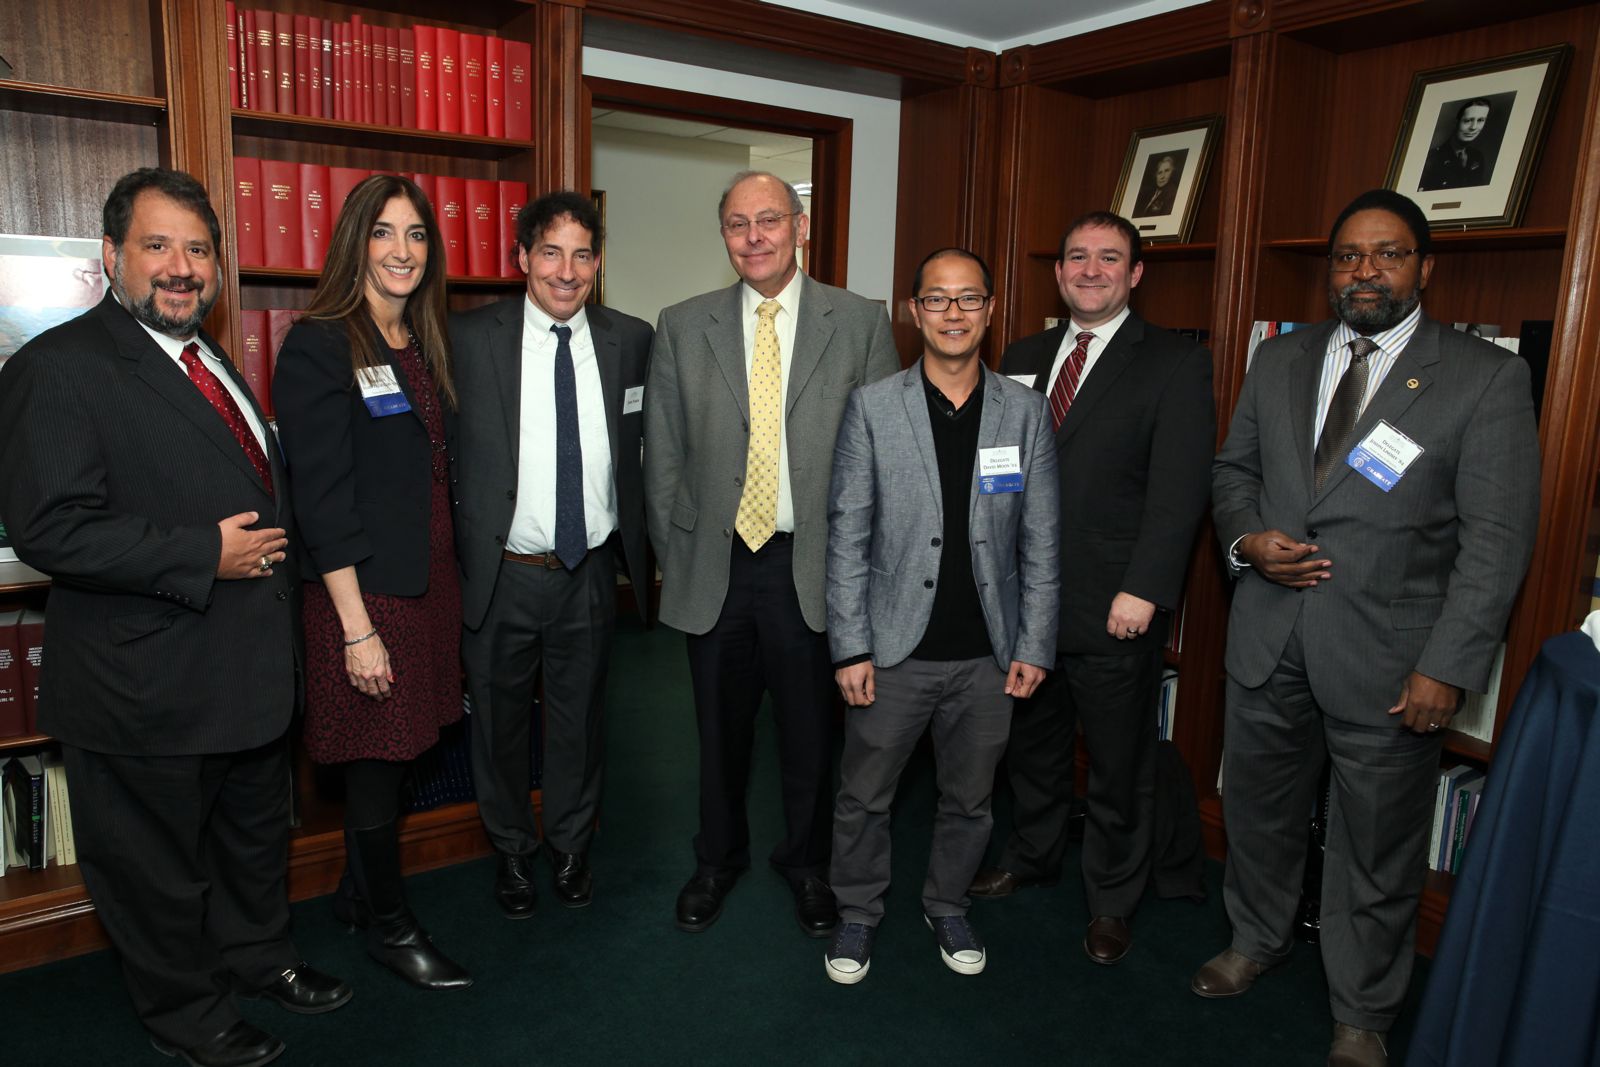 Newly elected officials with Dean Grossman and Professor Raskin